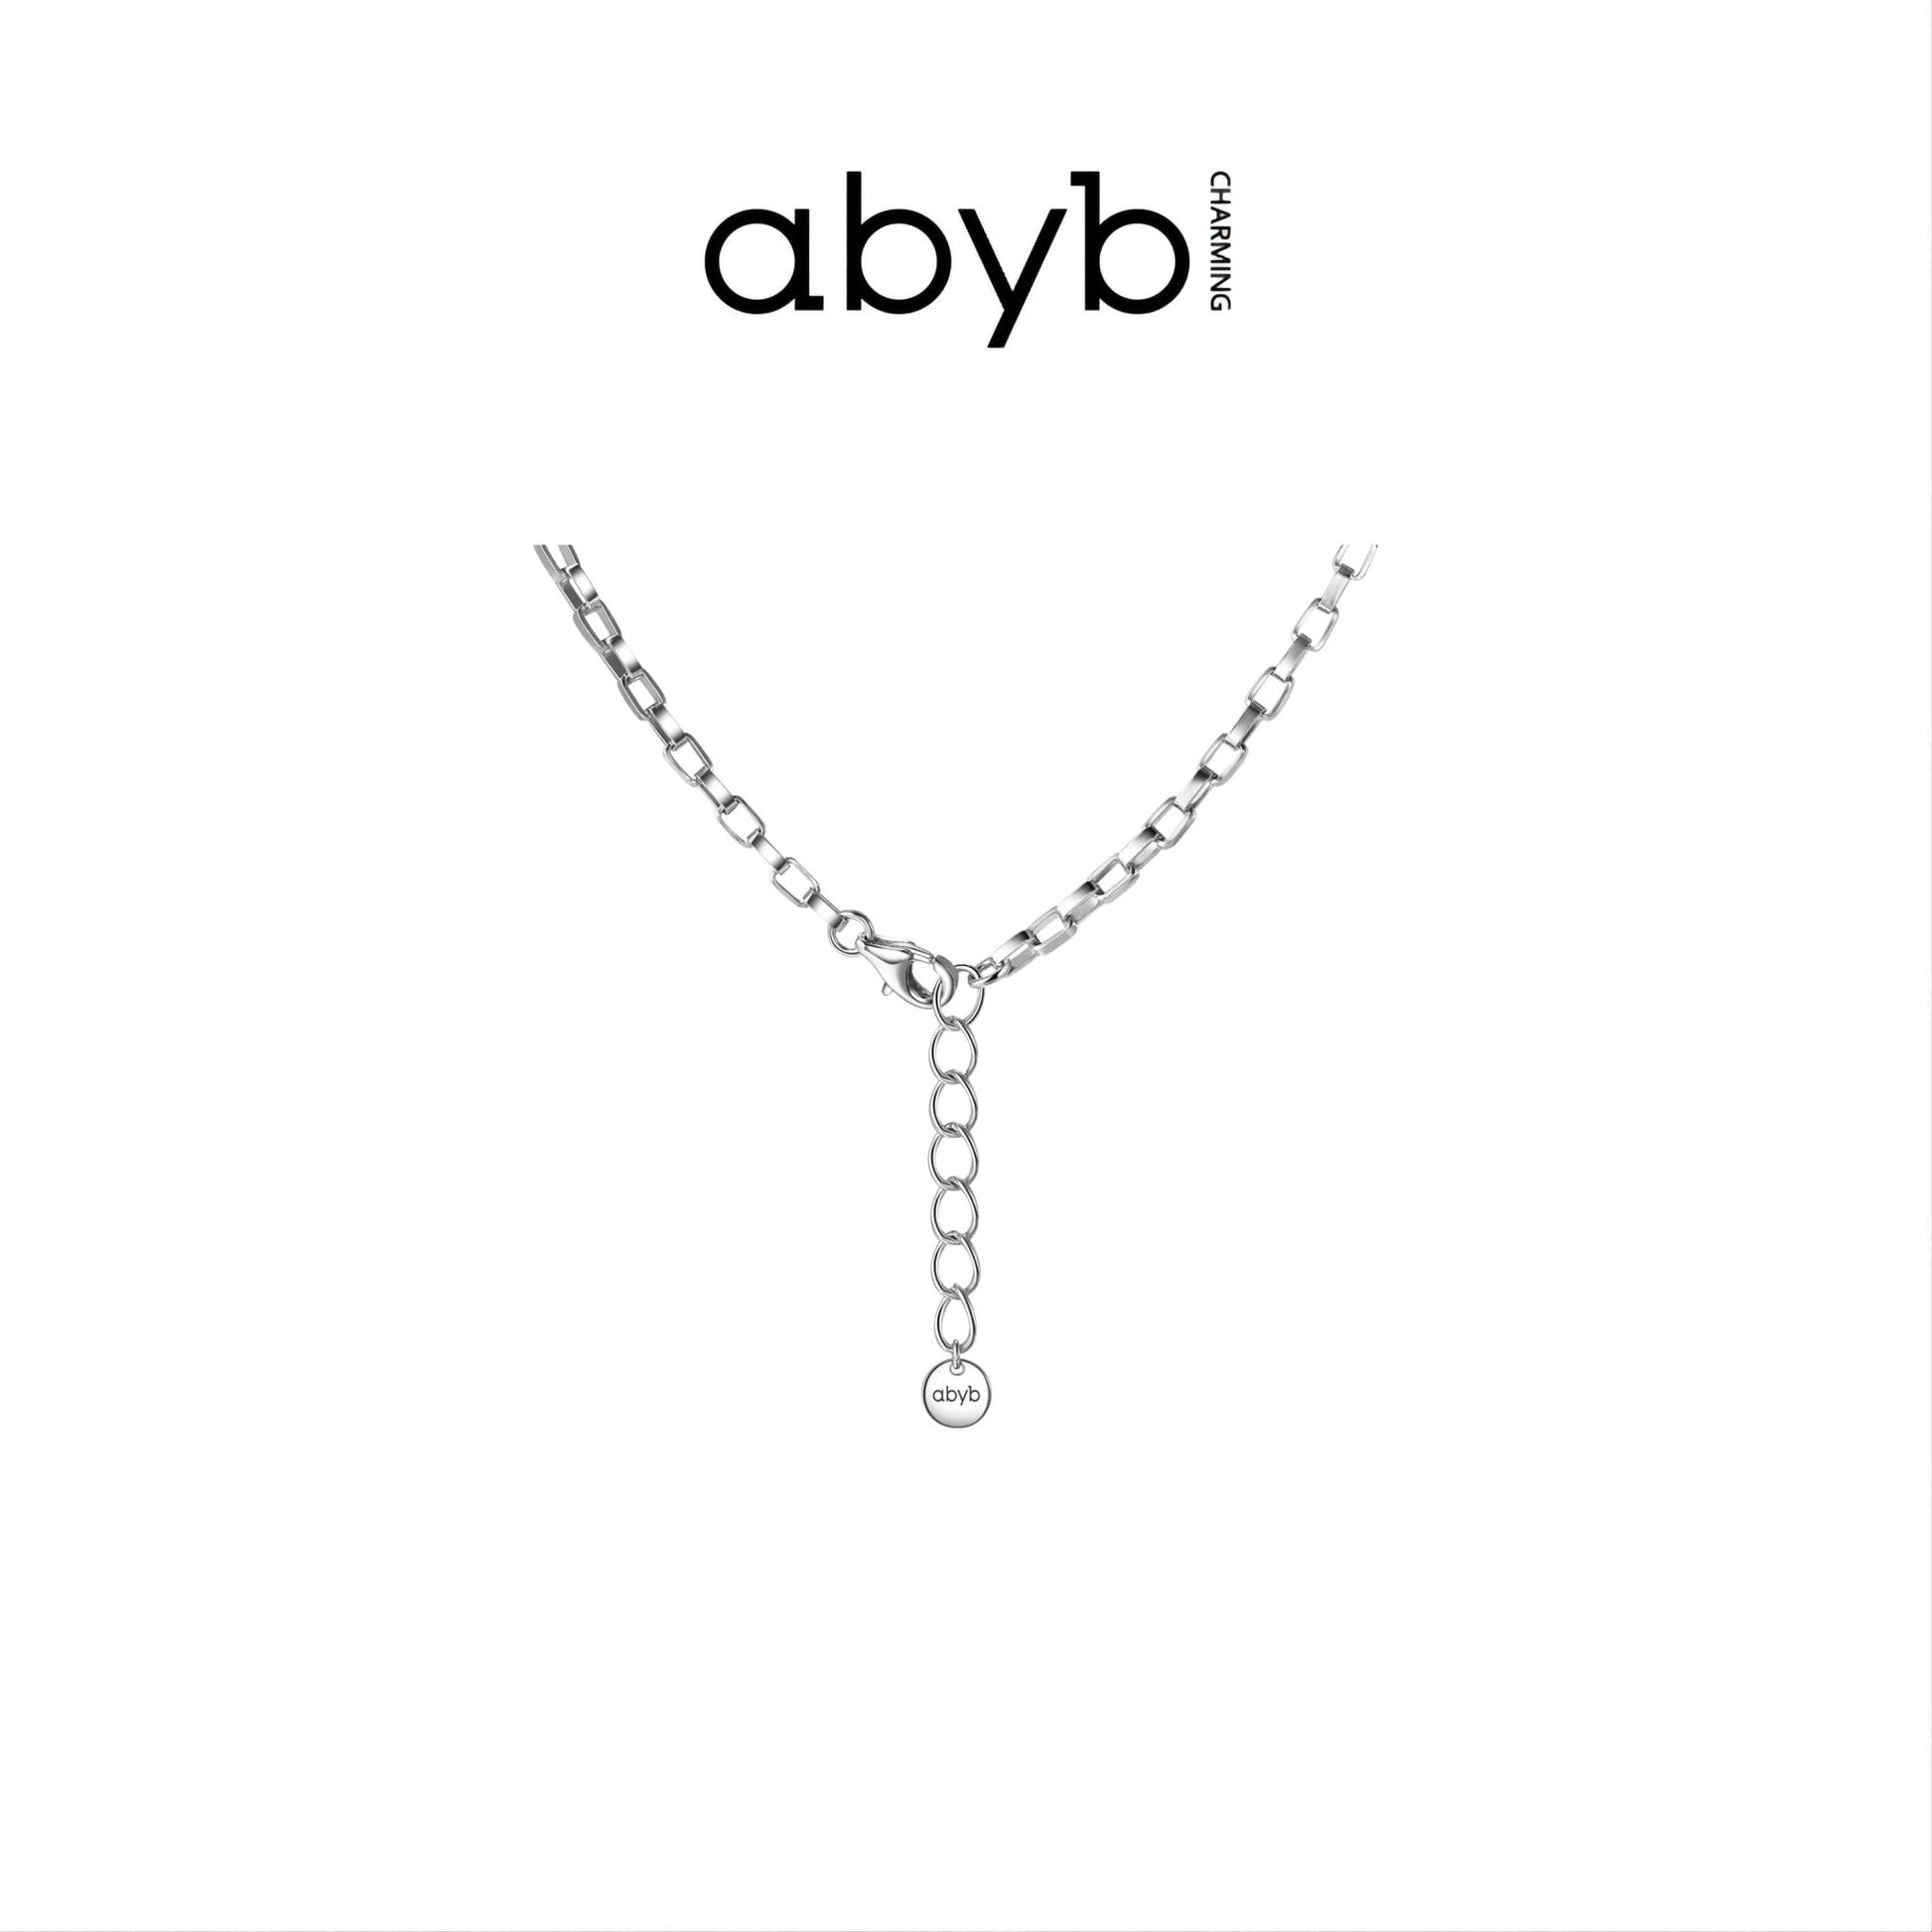 Abyb Charming First Necklace - Fixxshop